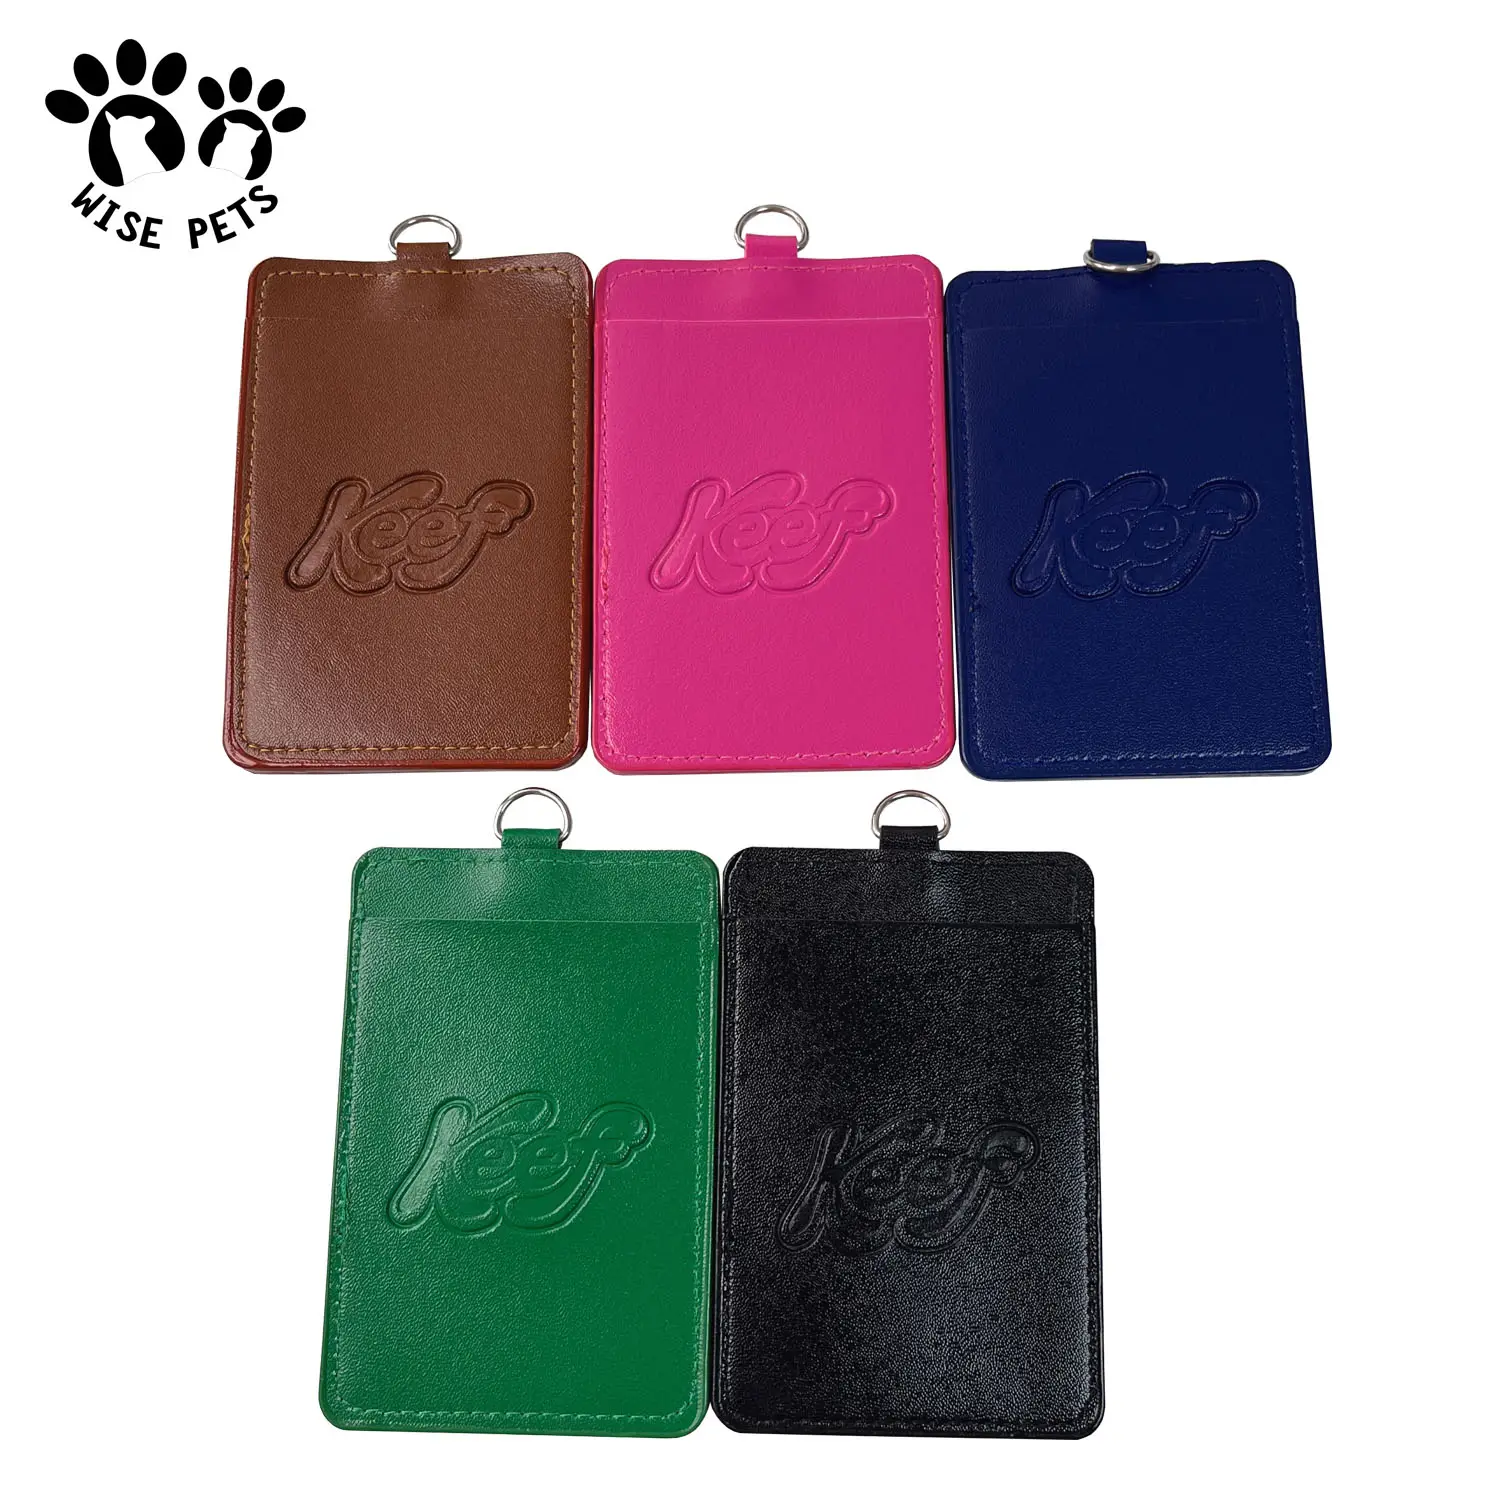 PU Leather Slim Credit Card Case Work Badge Id Card Holder Vertical Horizontal Leather Name Card Badge Holder with Lanyard